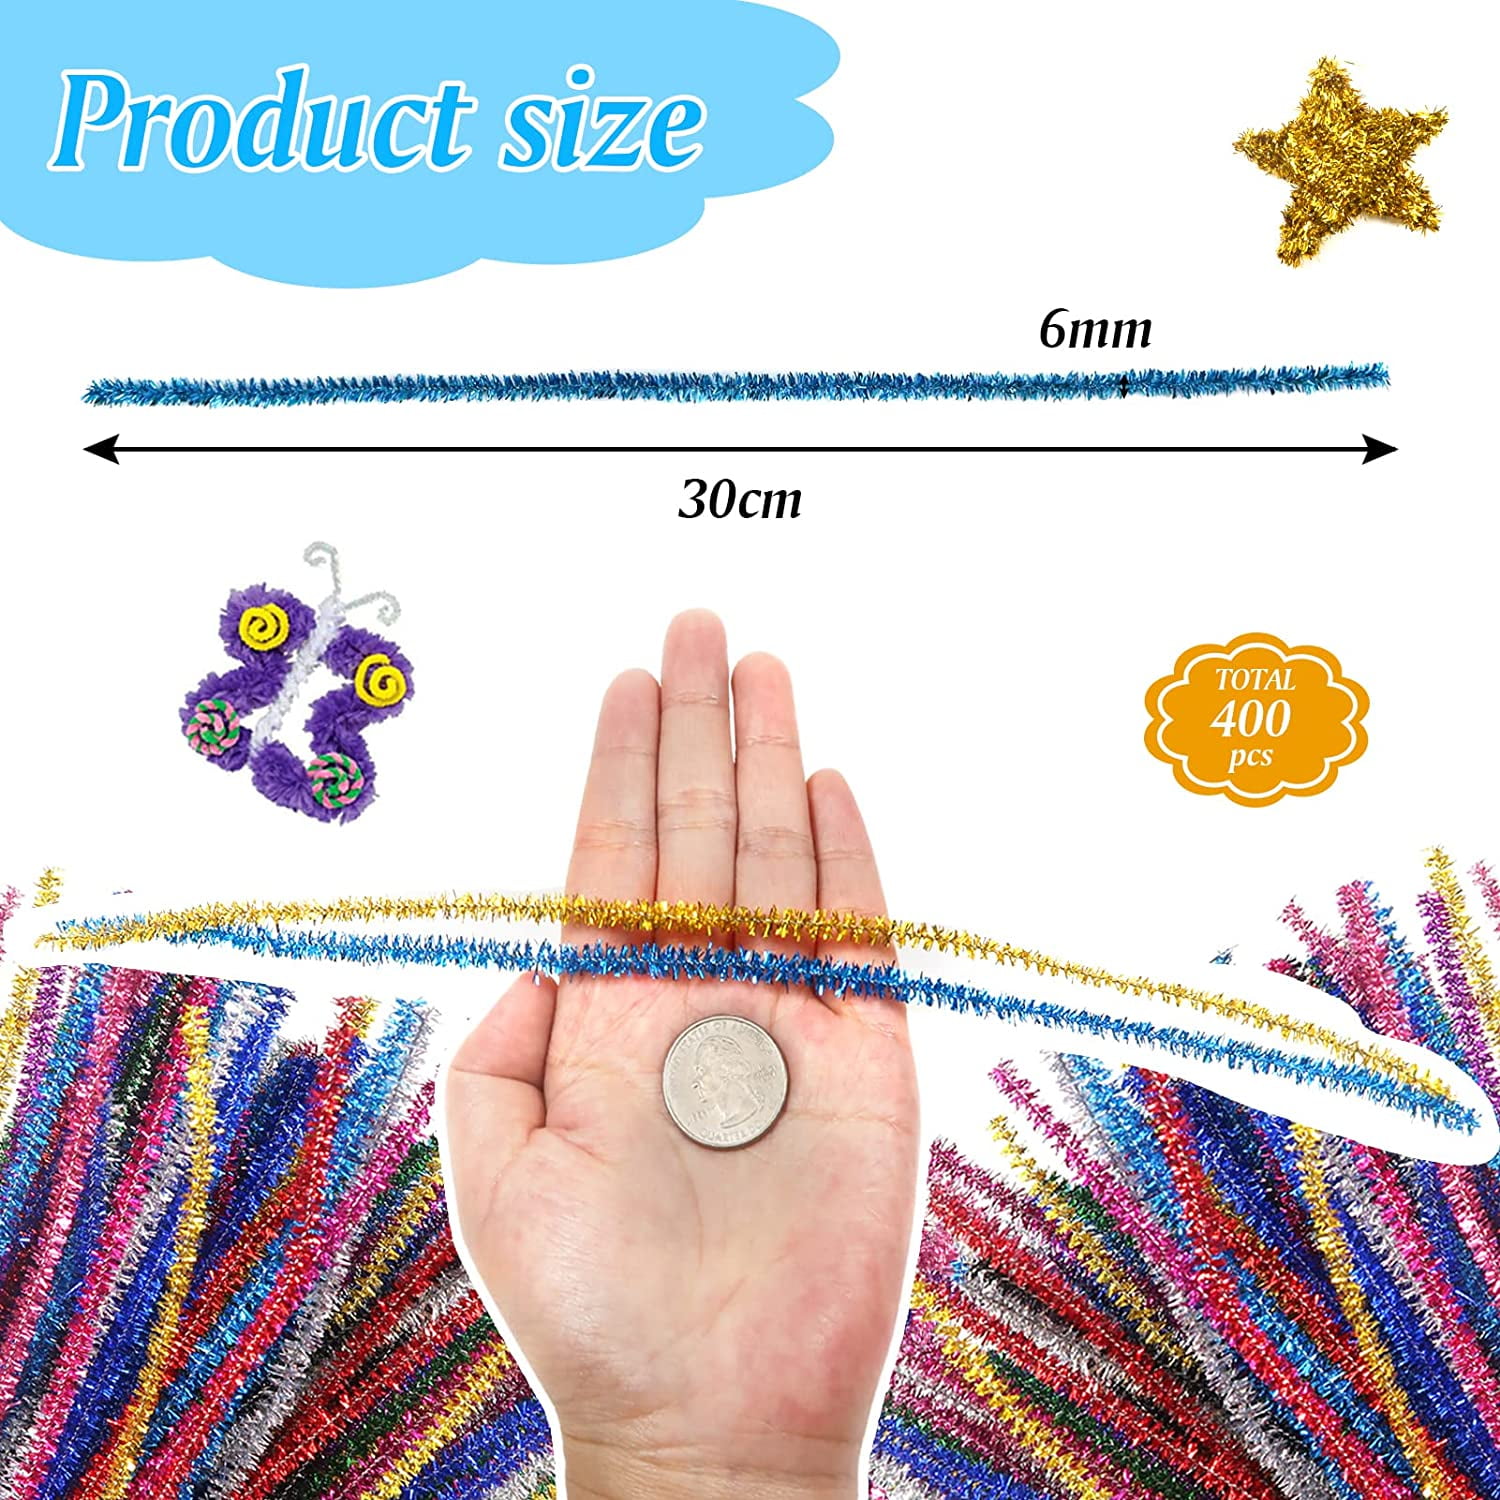 Juasky 400pcs Gold Pipe Cleaners Chenille Stem, Pipe Cleaners Craft  Supplies, for DIY, Making Toys, Creative Home Art Craft Decorations (6mm x  12